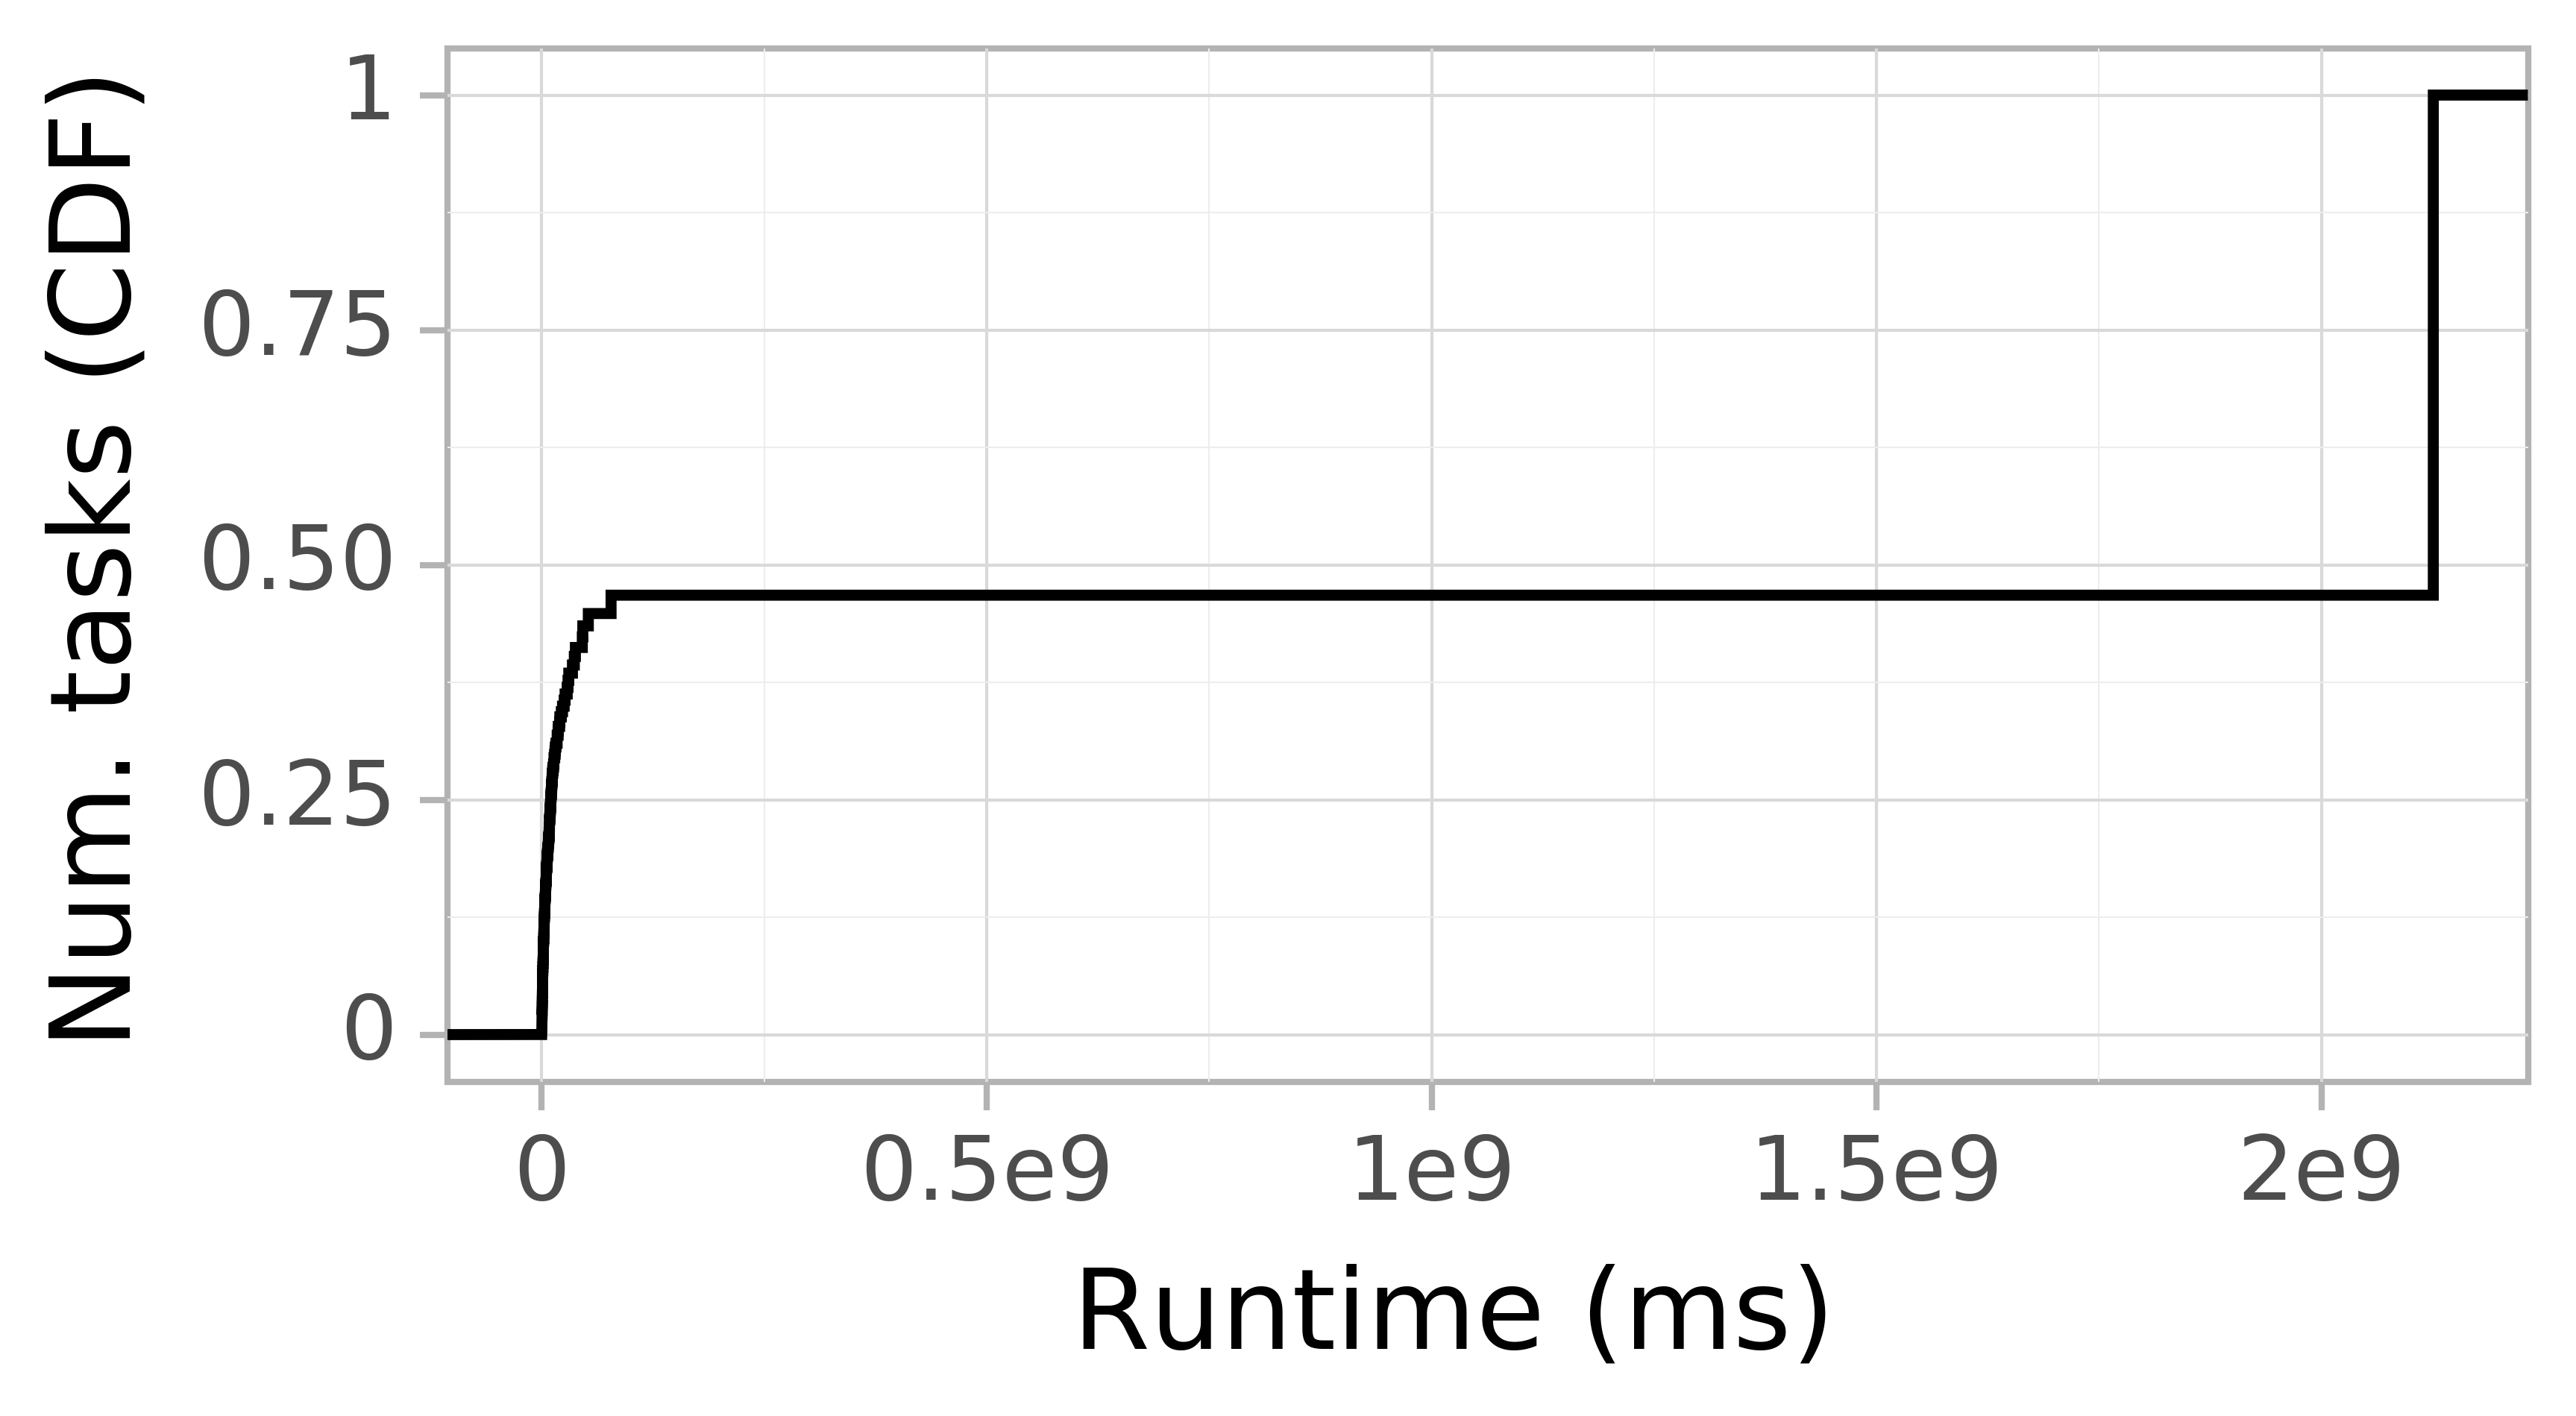 Task runtime CDF graph for the Google trace.